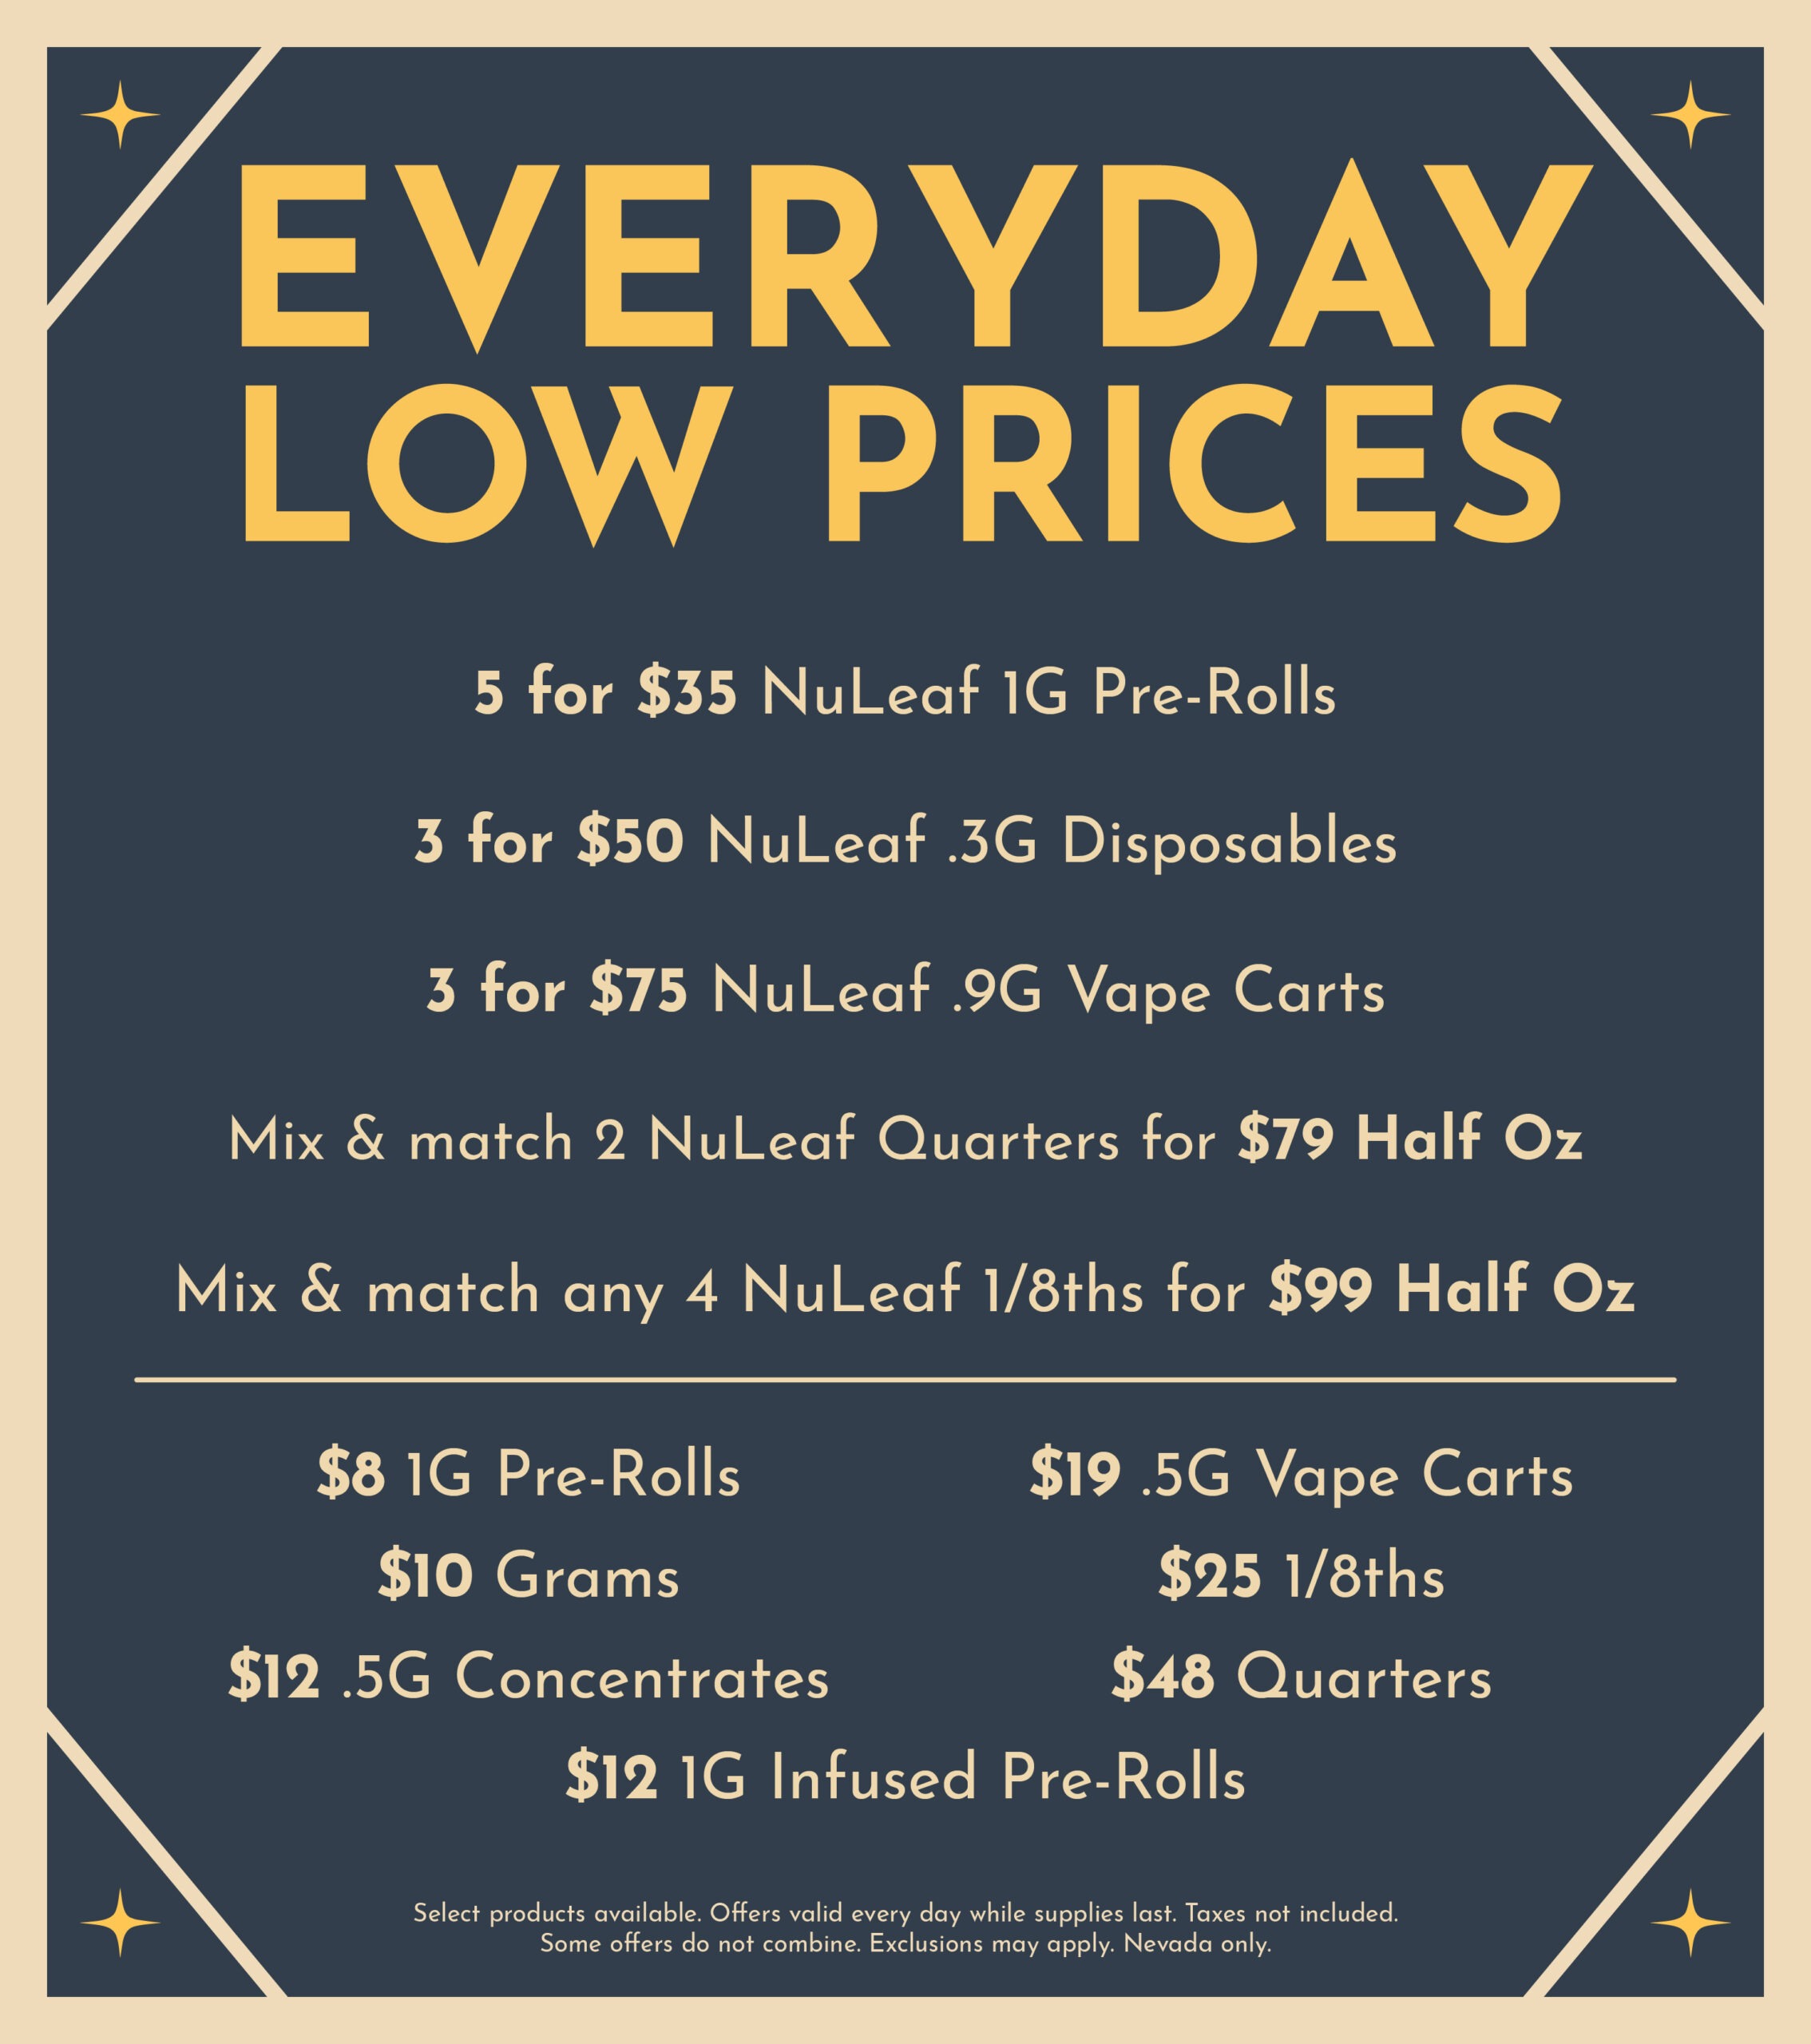 Beyond Hello Las Vegas Everyday deals and low prices